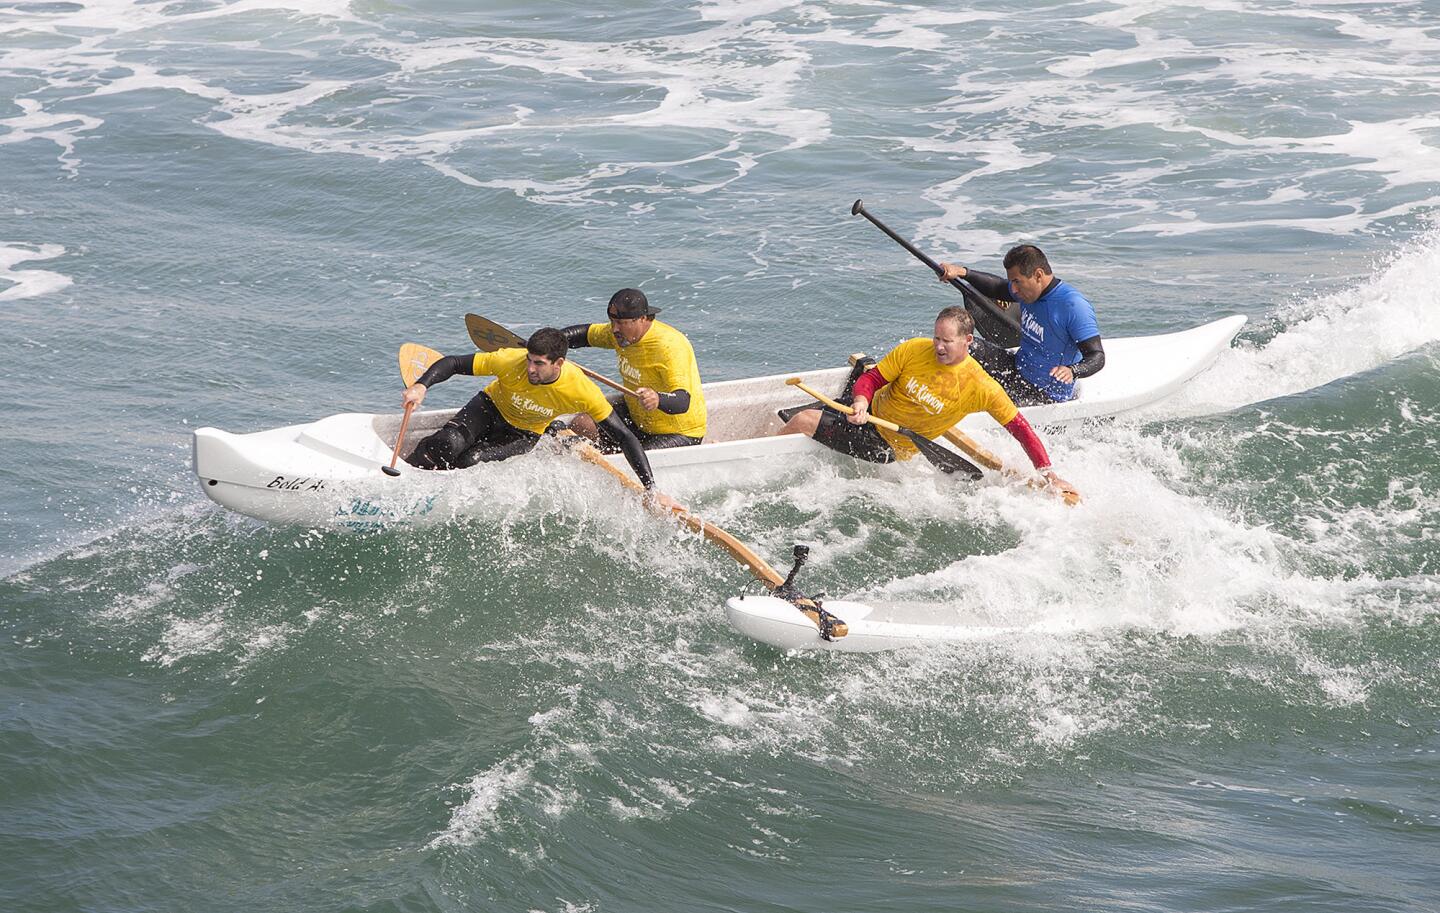 Rocky McKinnon, right, leads his four-man crew over a wave south of the Huntington Beach Pier on Friday, when he debuted an outrigger surfing canoe program called Bold As Love.